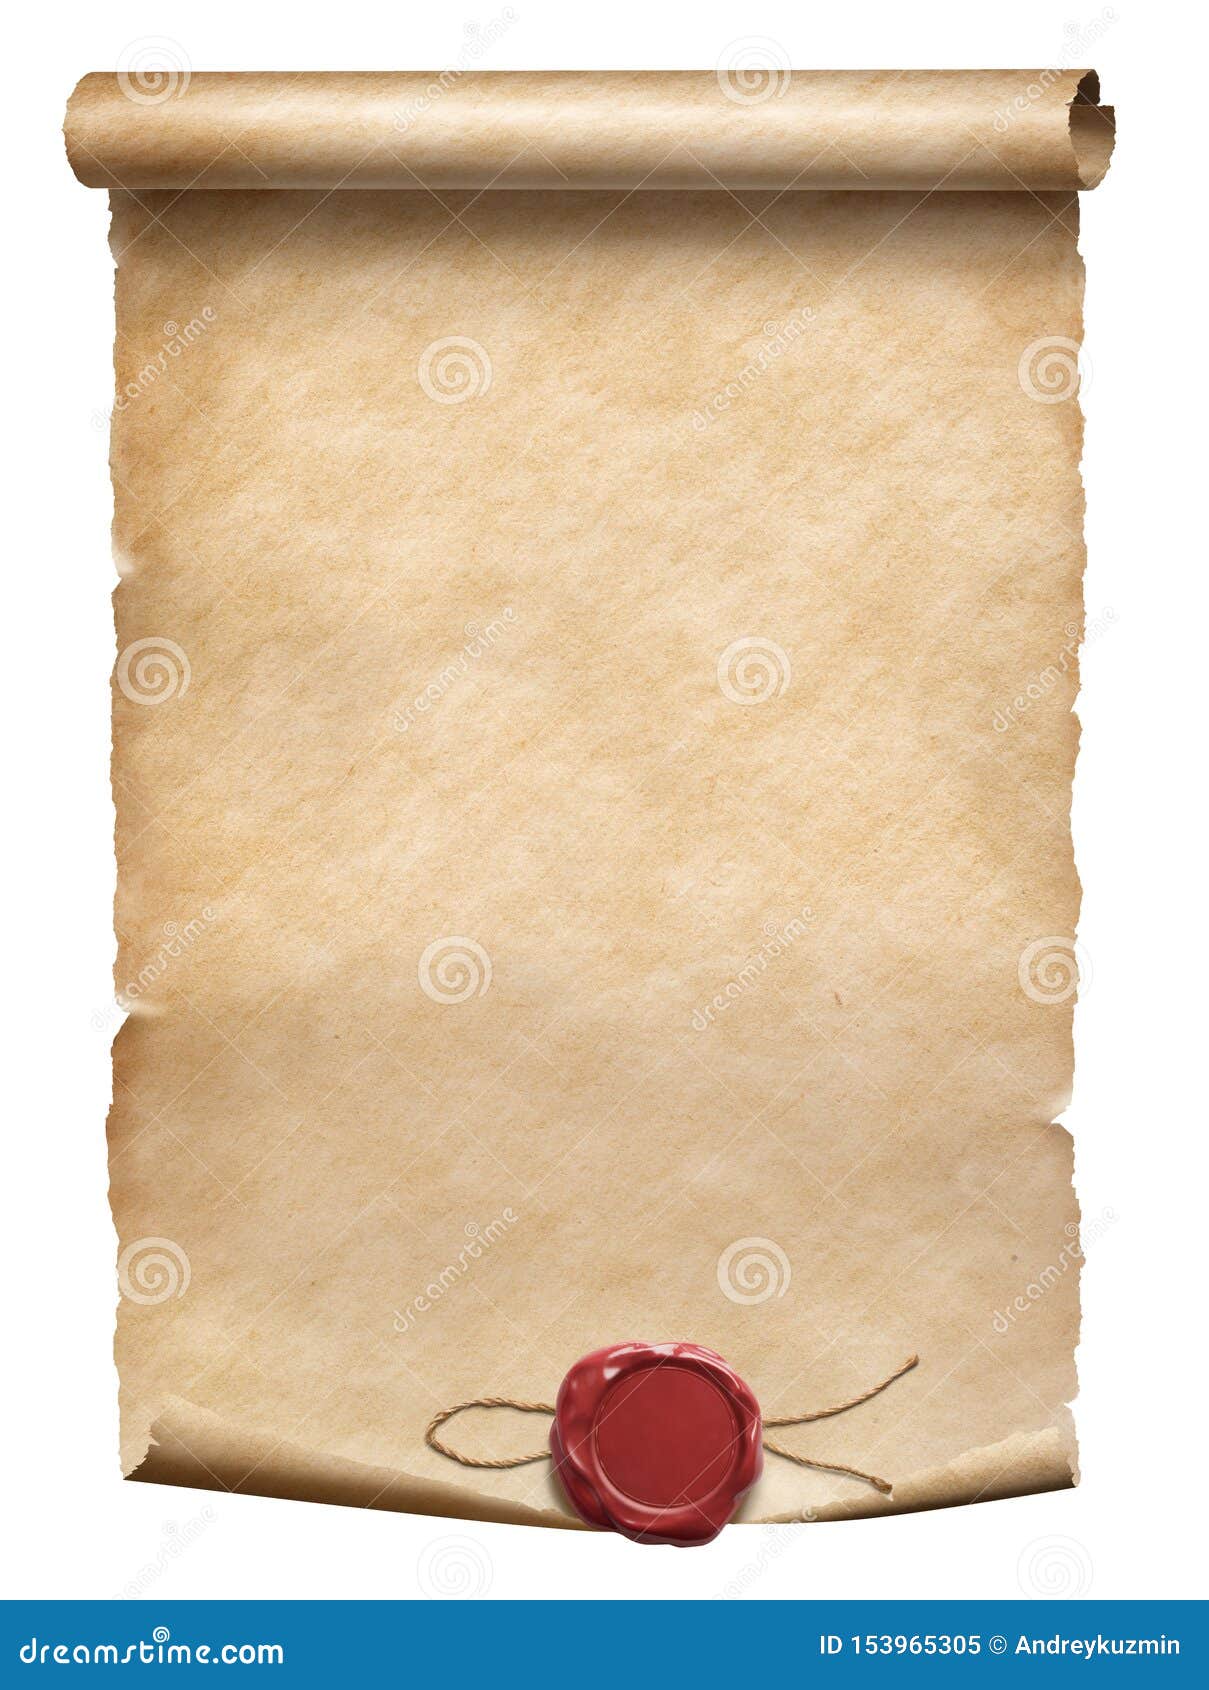 Old ragged parchment roll with red wax seal, Stock image